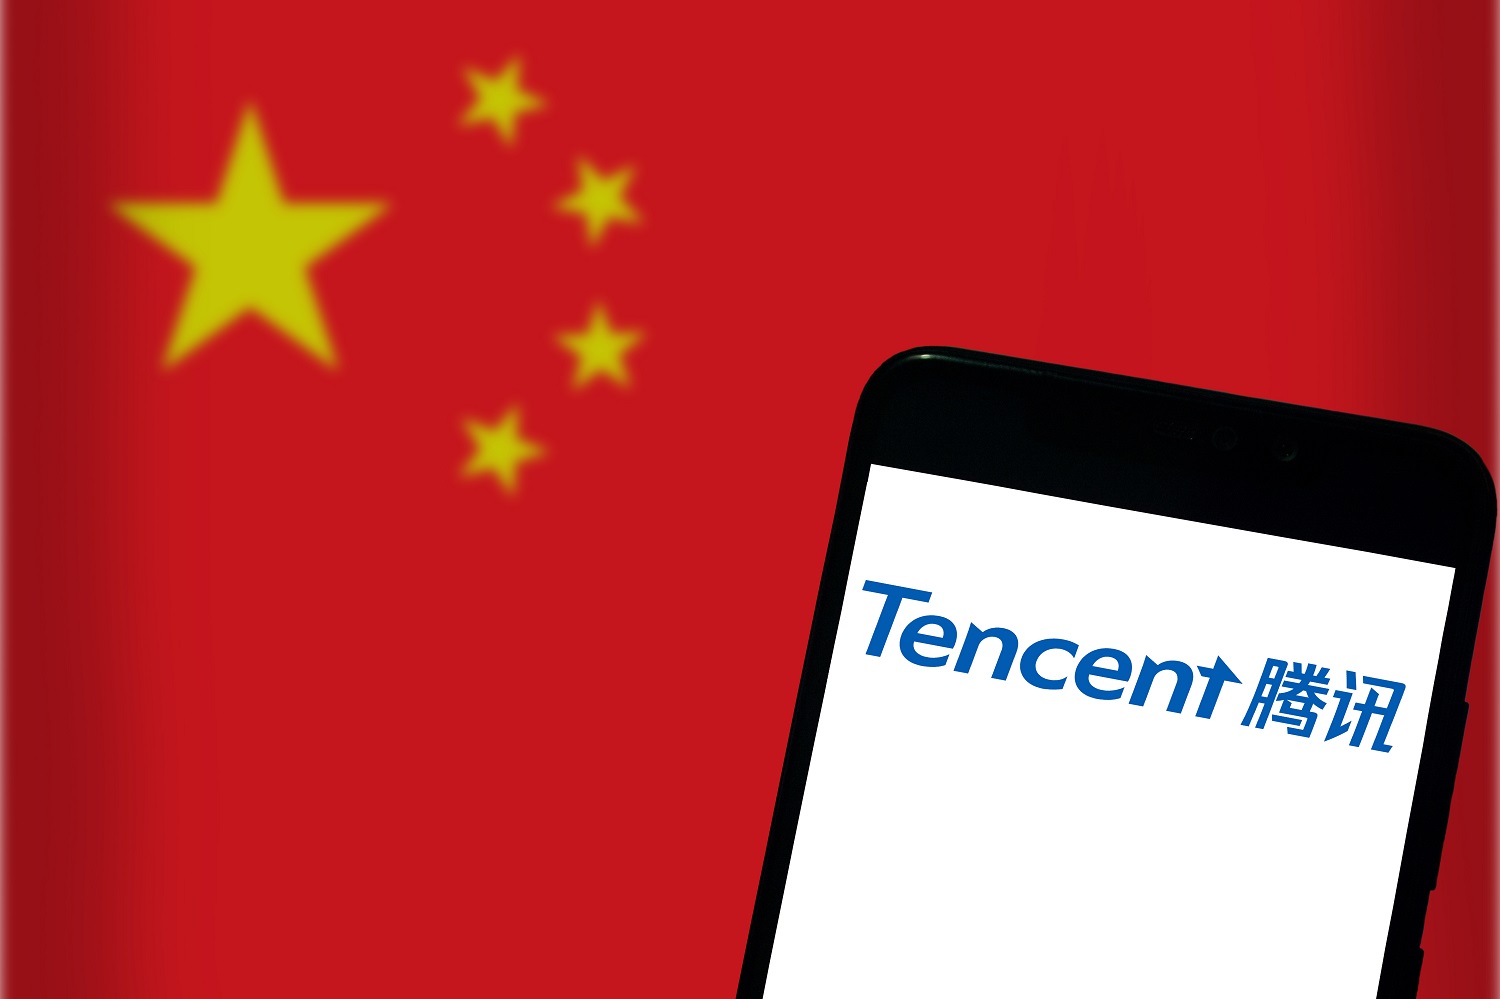 The Tencent logo on a mobile phone screen against the background of a Chinese flag.